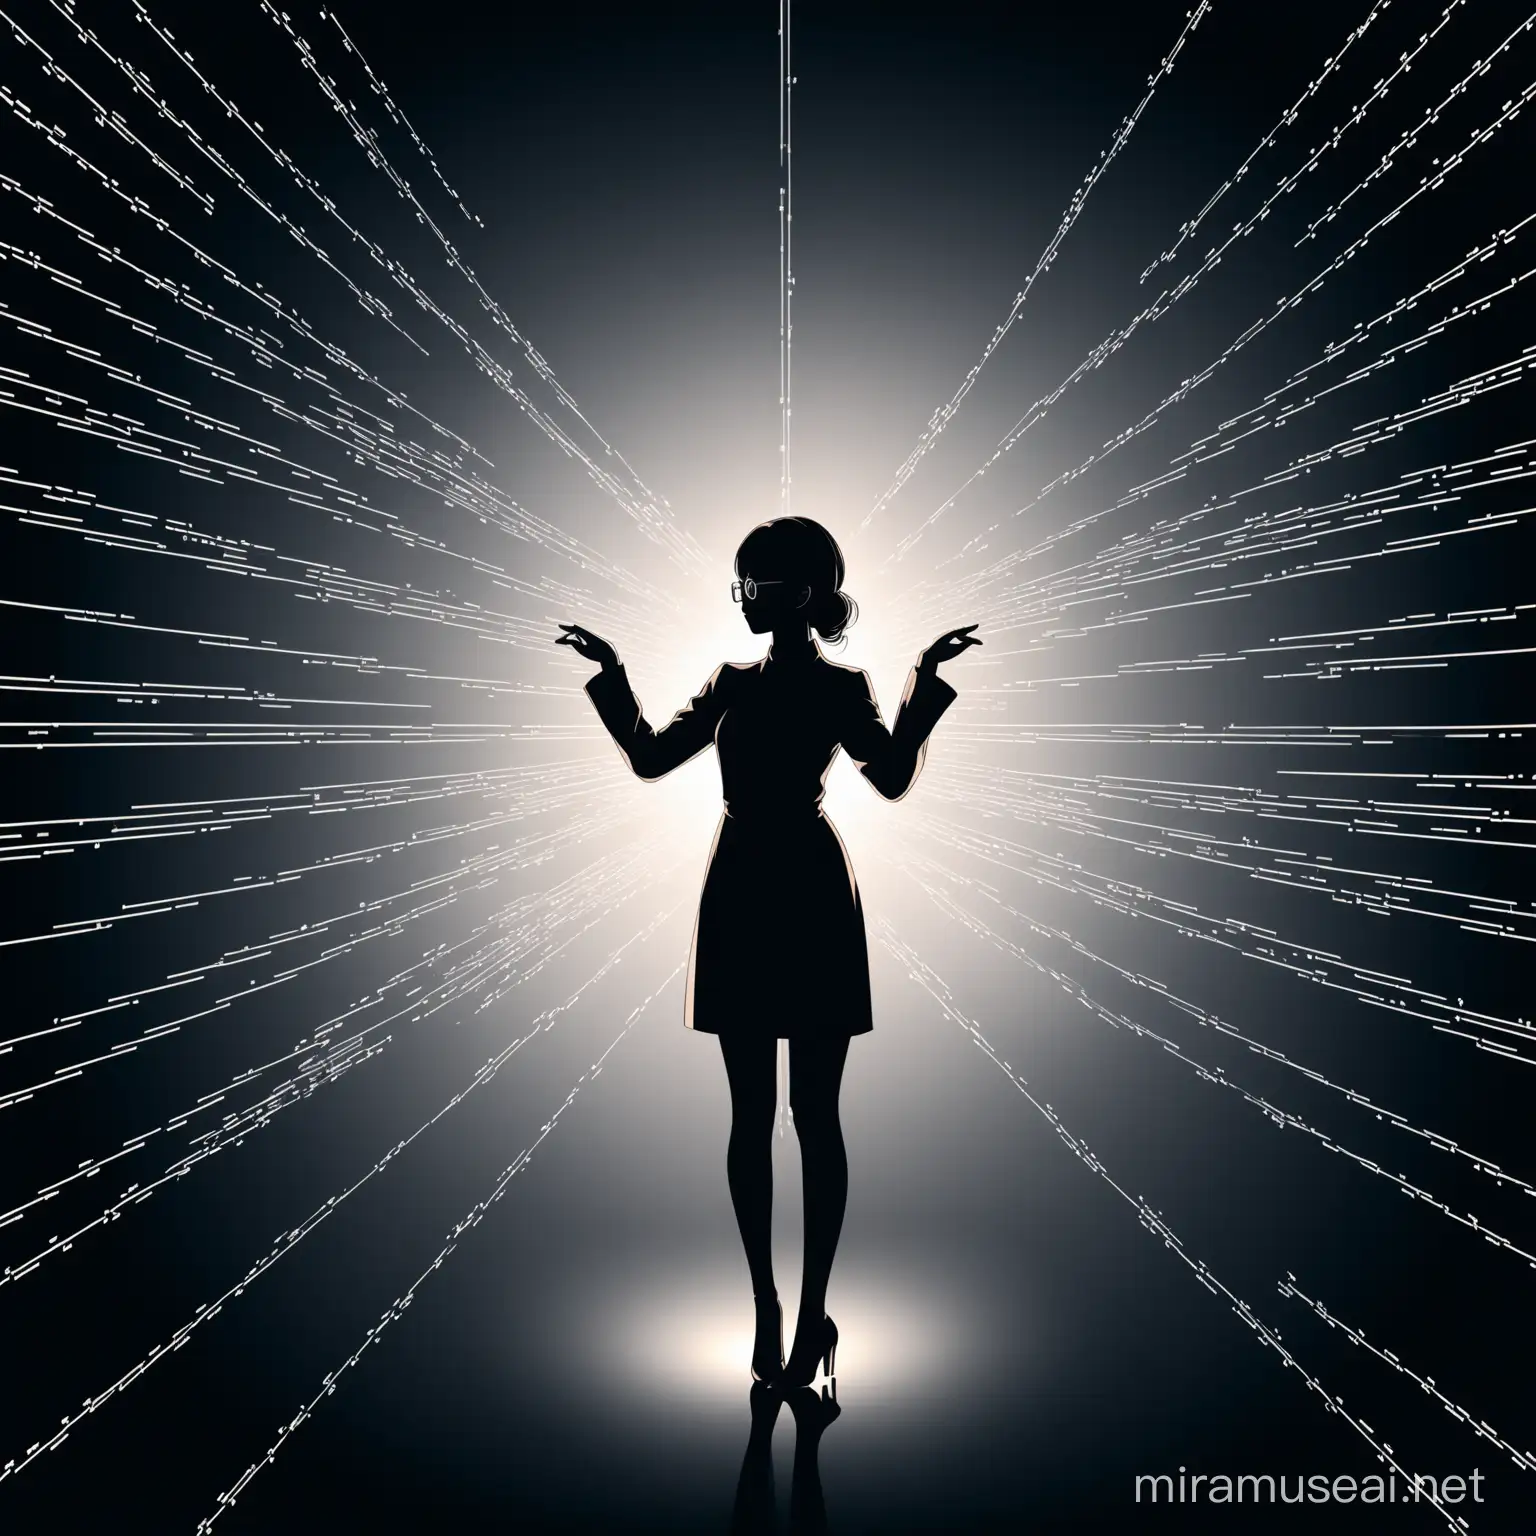 Create an elegant silhouette of a poised young woman wearing stylish glasses, standing confidently in a conductor-like pose. She appears to be engaged in programming, with lines of code subtly integrated into the background. The silhouette should convey a sense of skill, sophistication, and mastery, blending the worlds of technology and orchestration seamlessly.